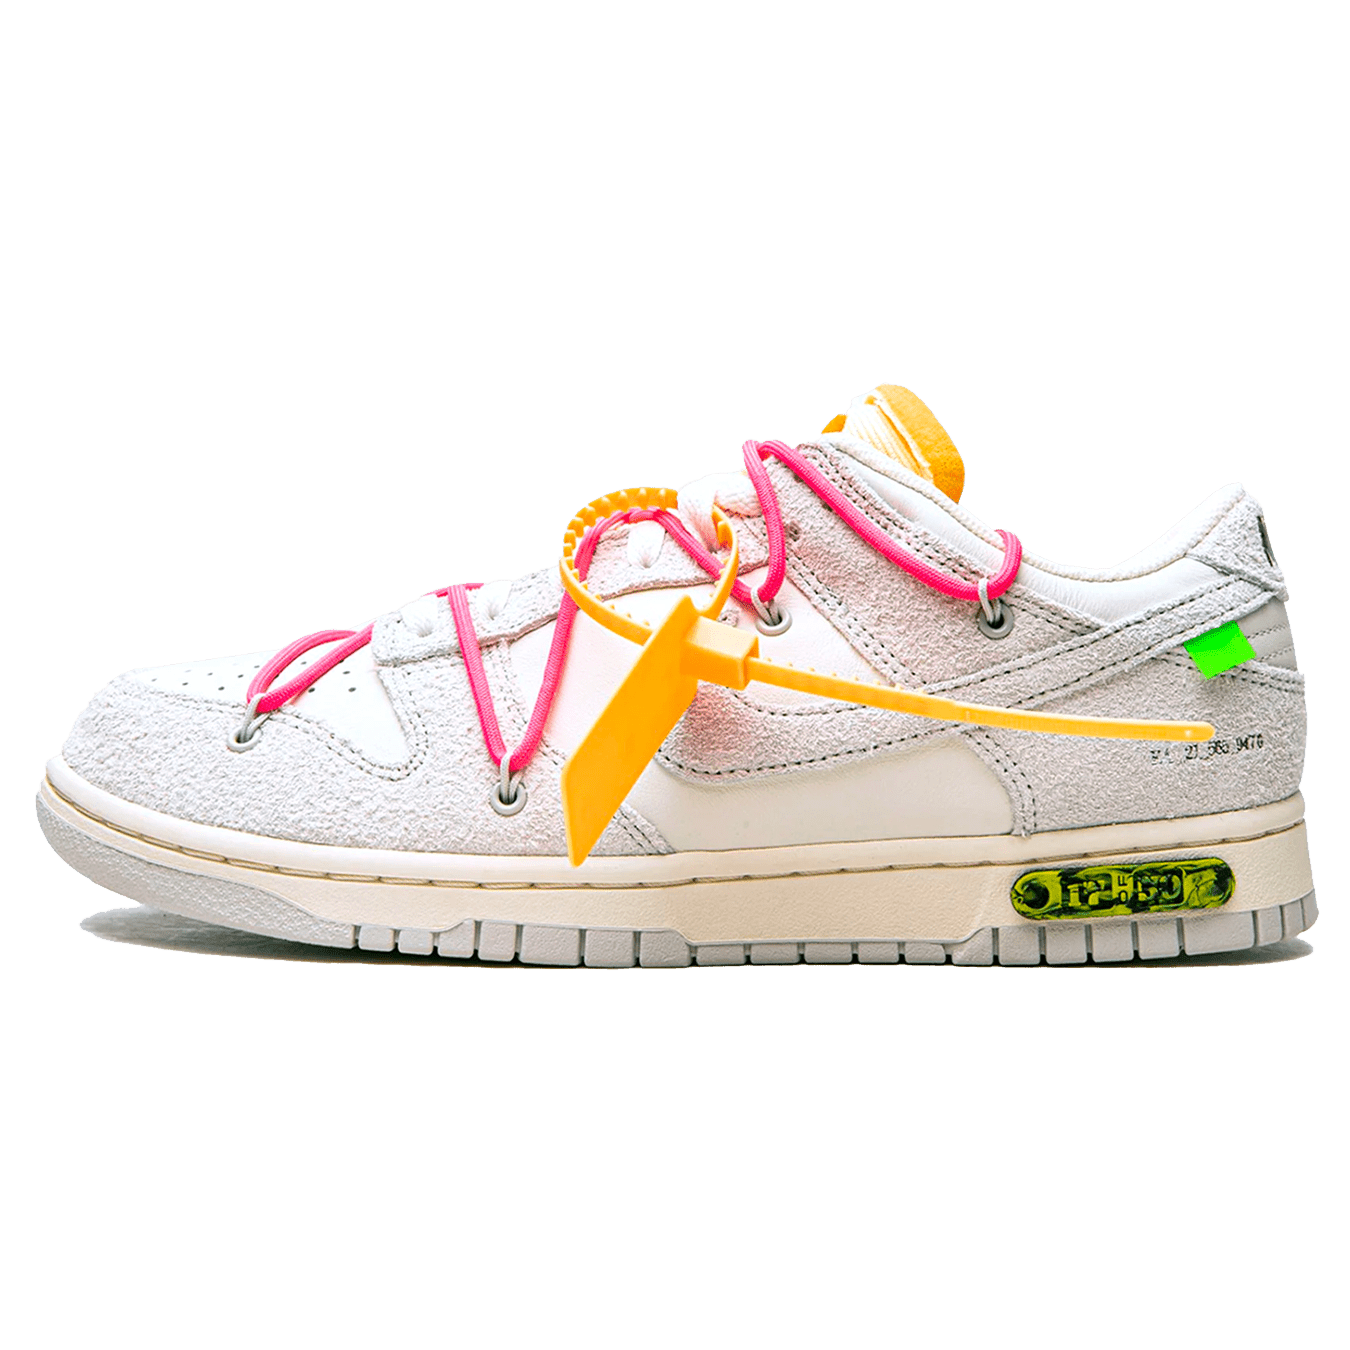 off-white nike dunk low The 50 lot 17-